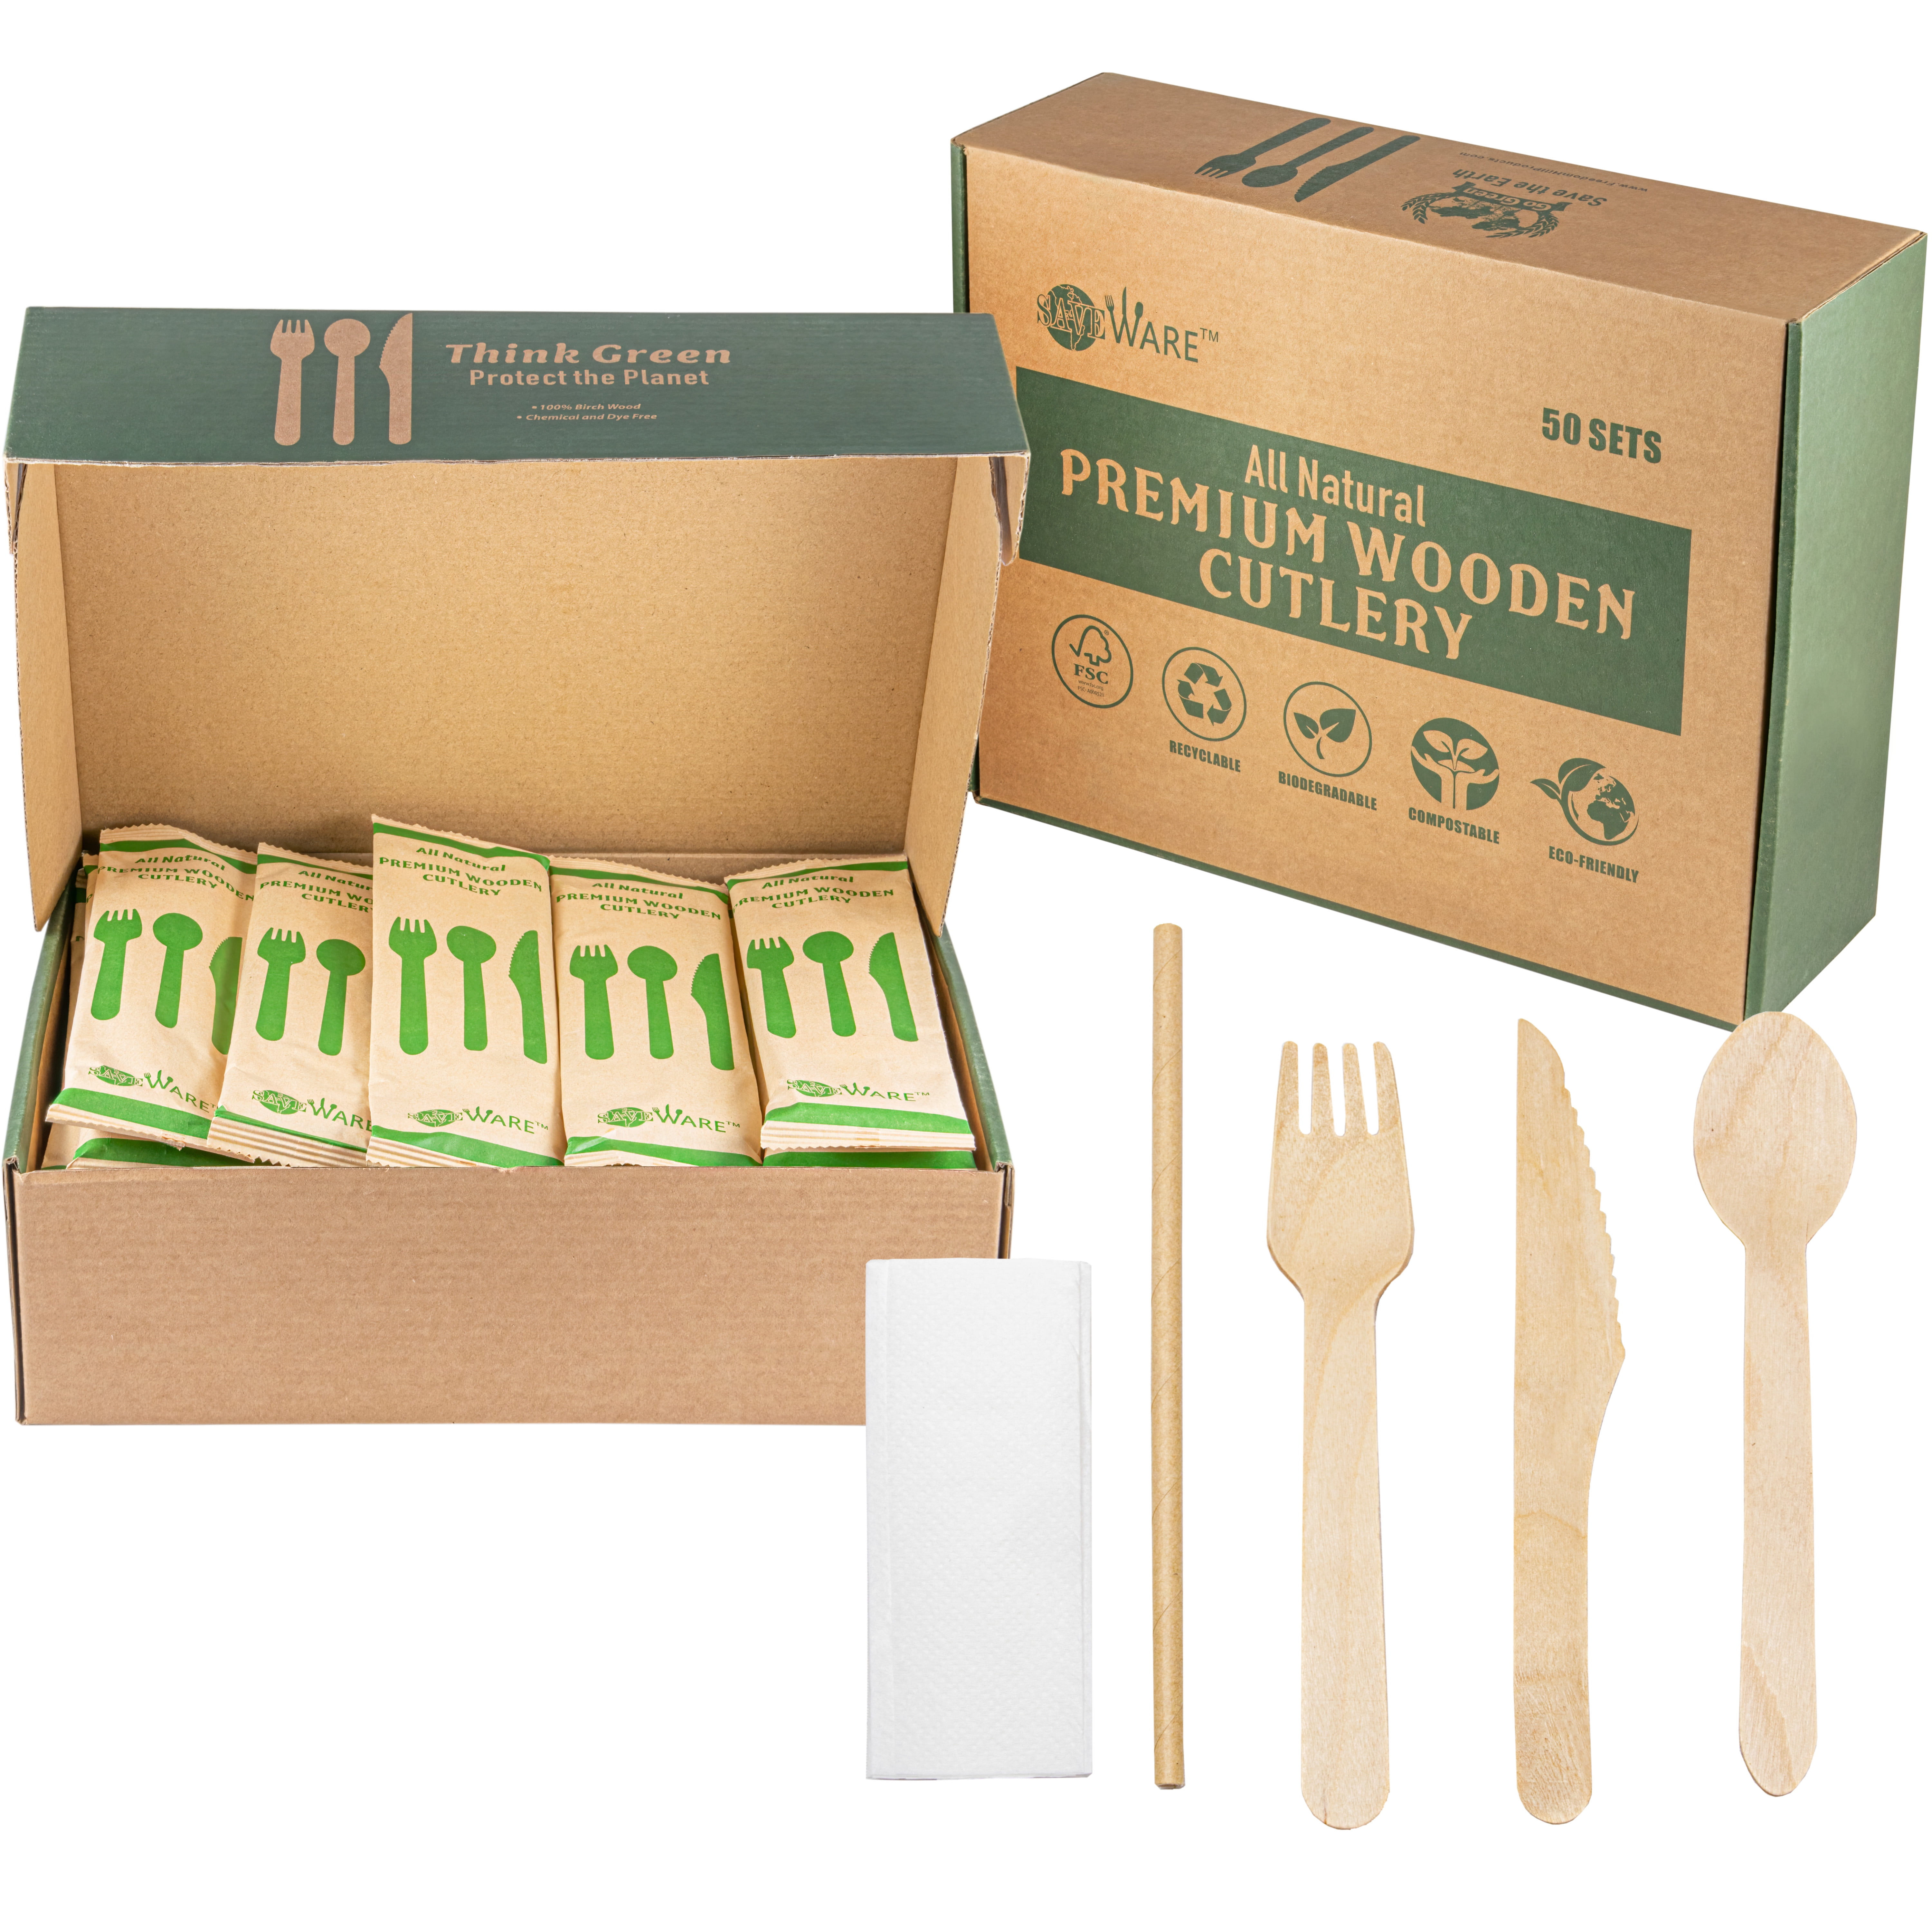 1000 x Wooden Knives Biodegradable Disposable High Quality Single Use Cutlery 